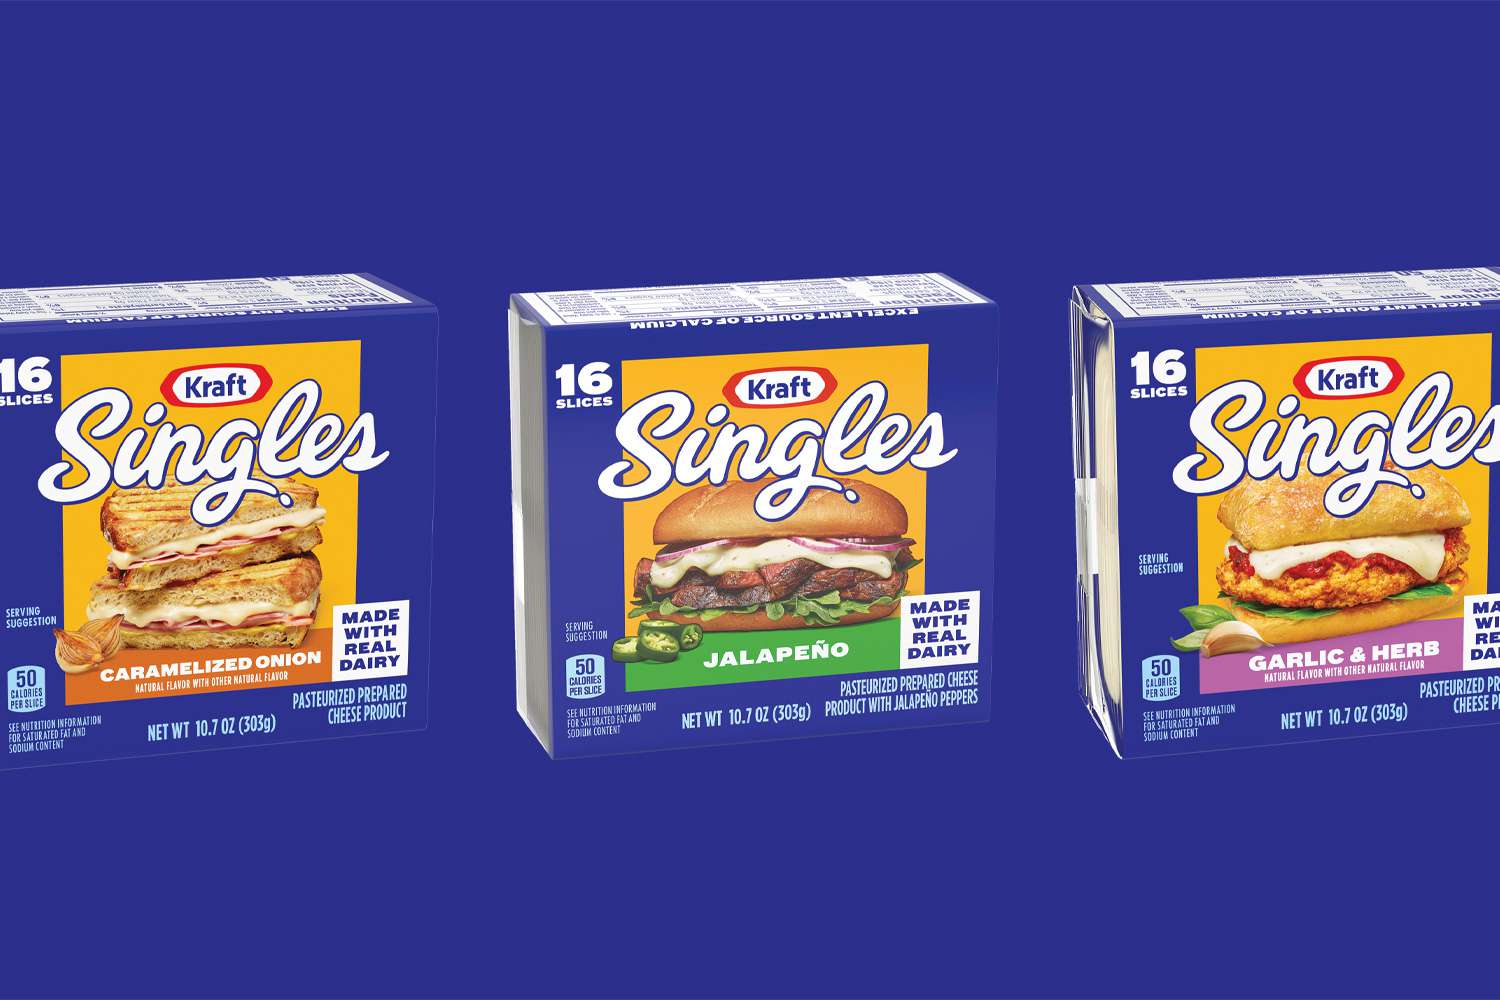 kraft singles is releasing new cheese slice flavors for the first time in nearly a decade